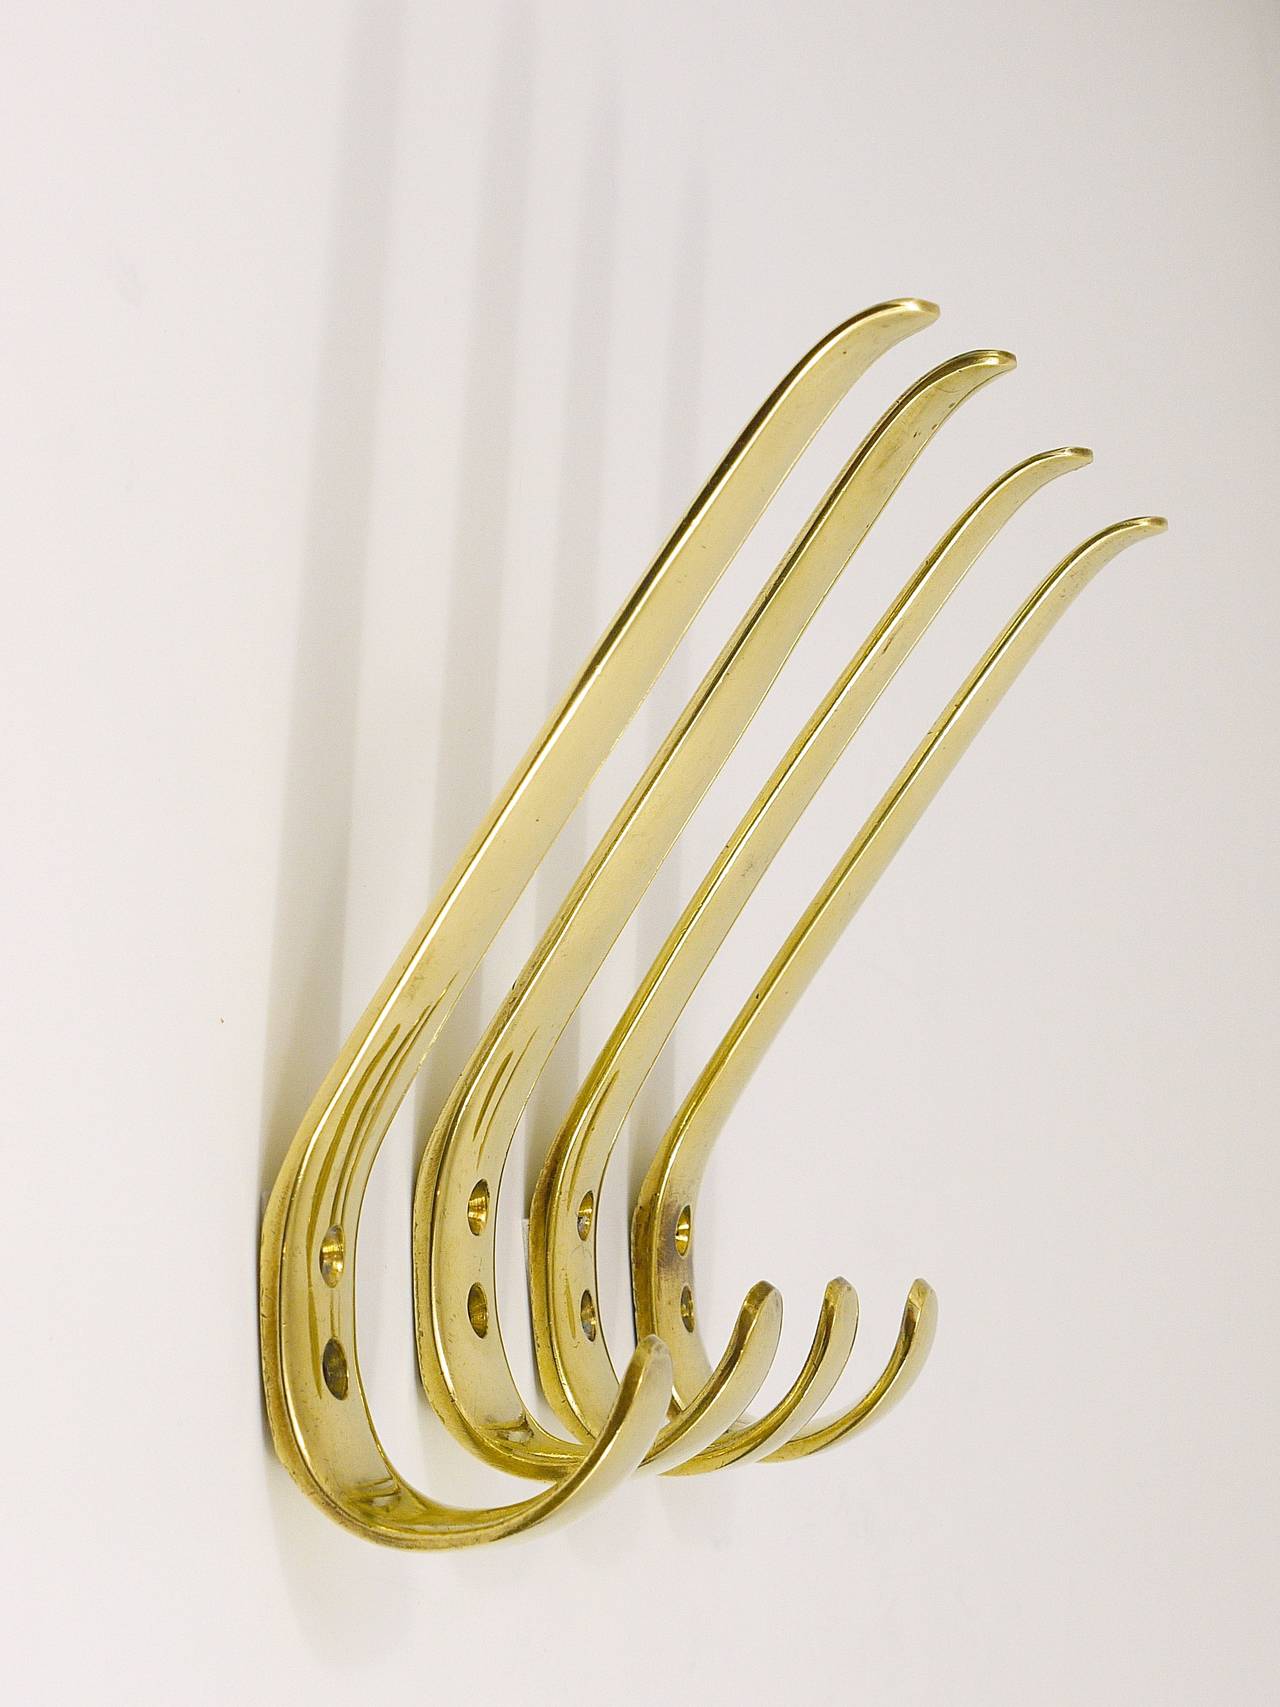 Up to 9 beautiful Austrian brass wall hooks, executed in the 1950s by Baller Austria. Gently polished by hand, in excellent condition with nice patina. 9 hooks available, sold separately, the price is per piece.